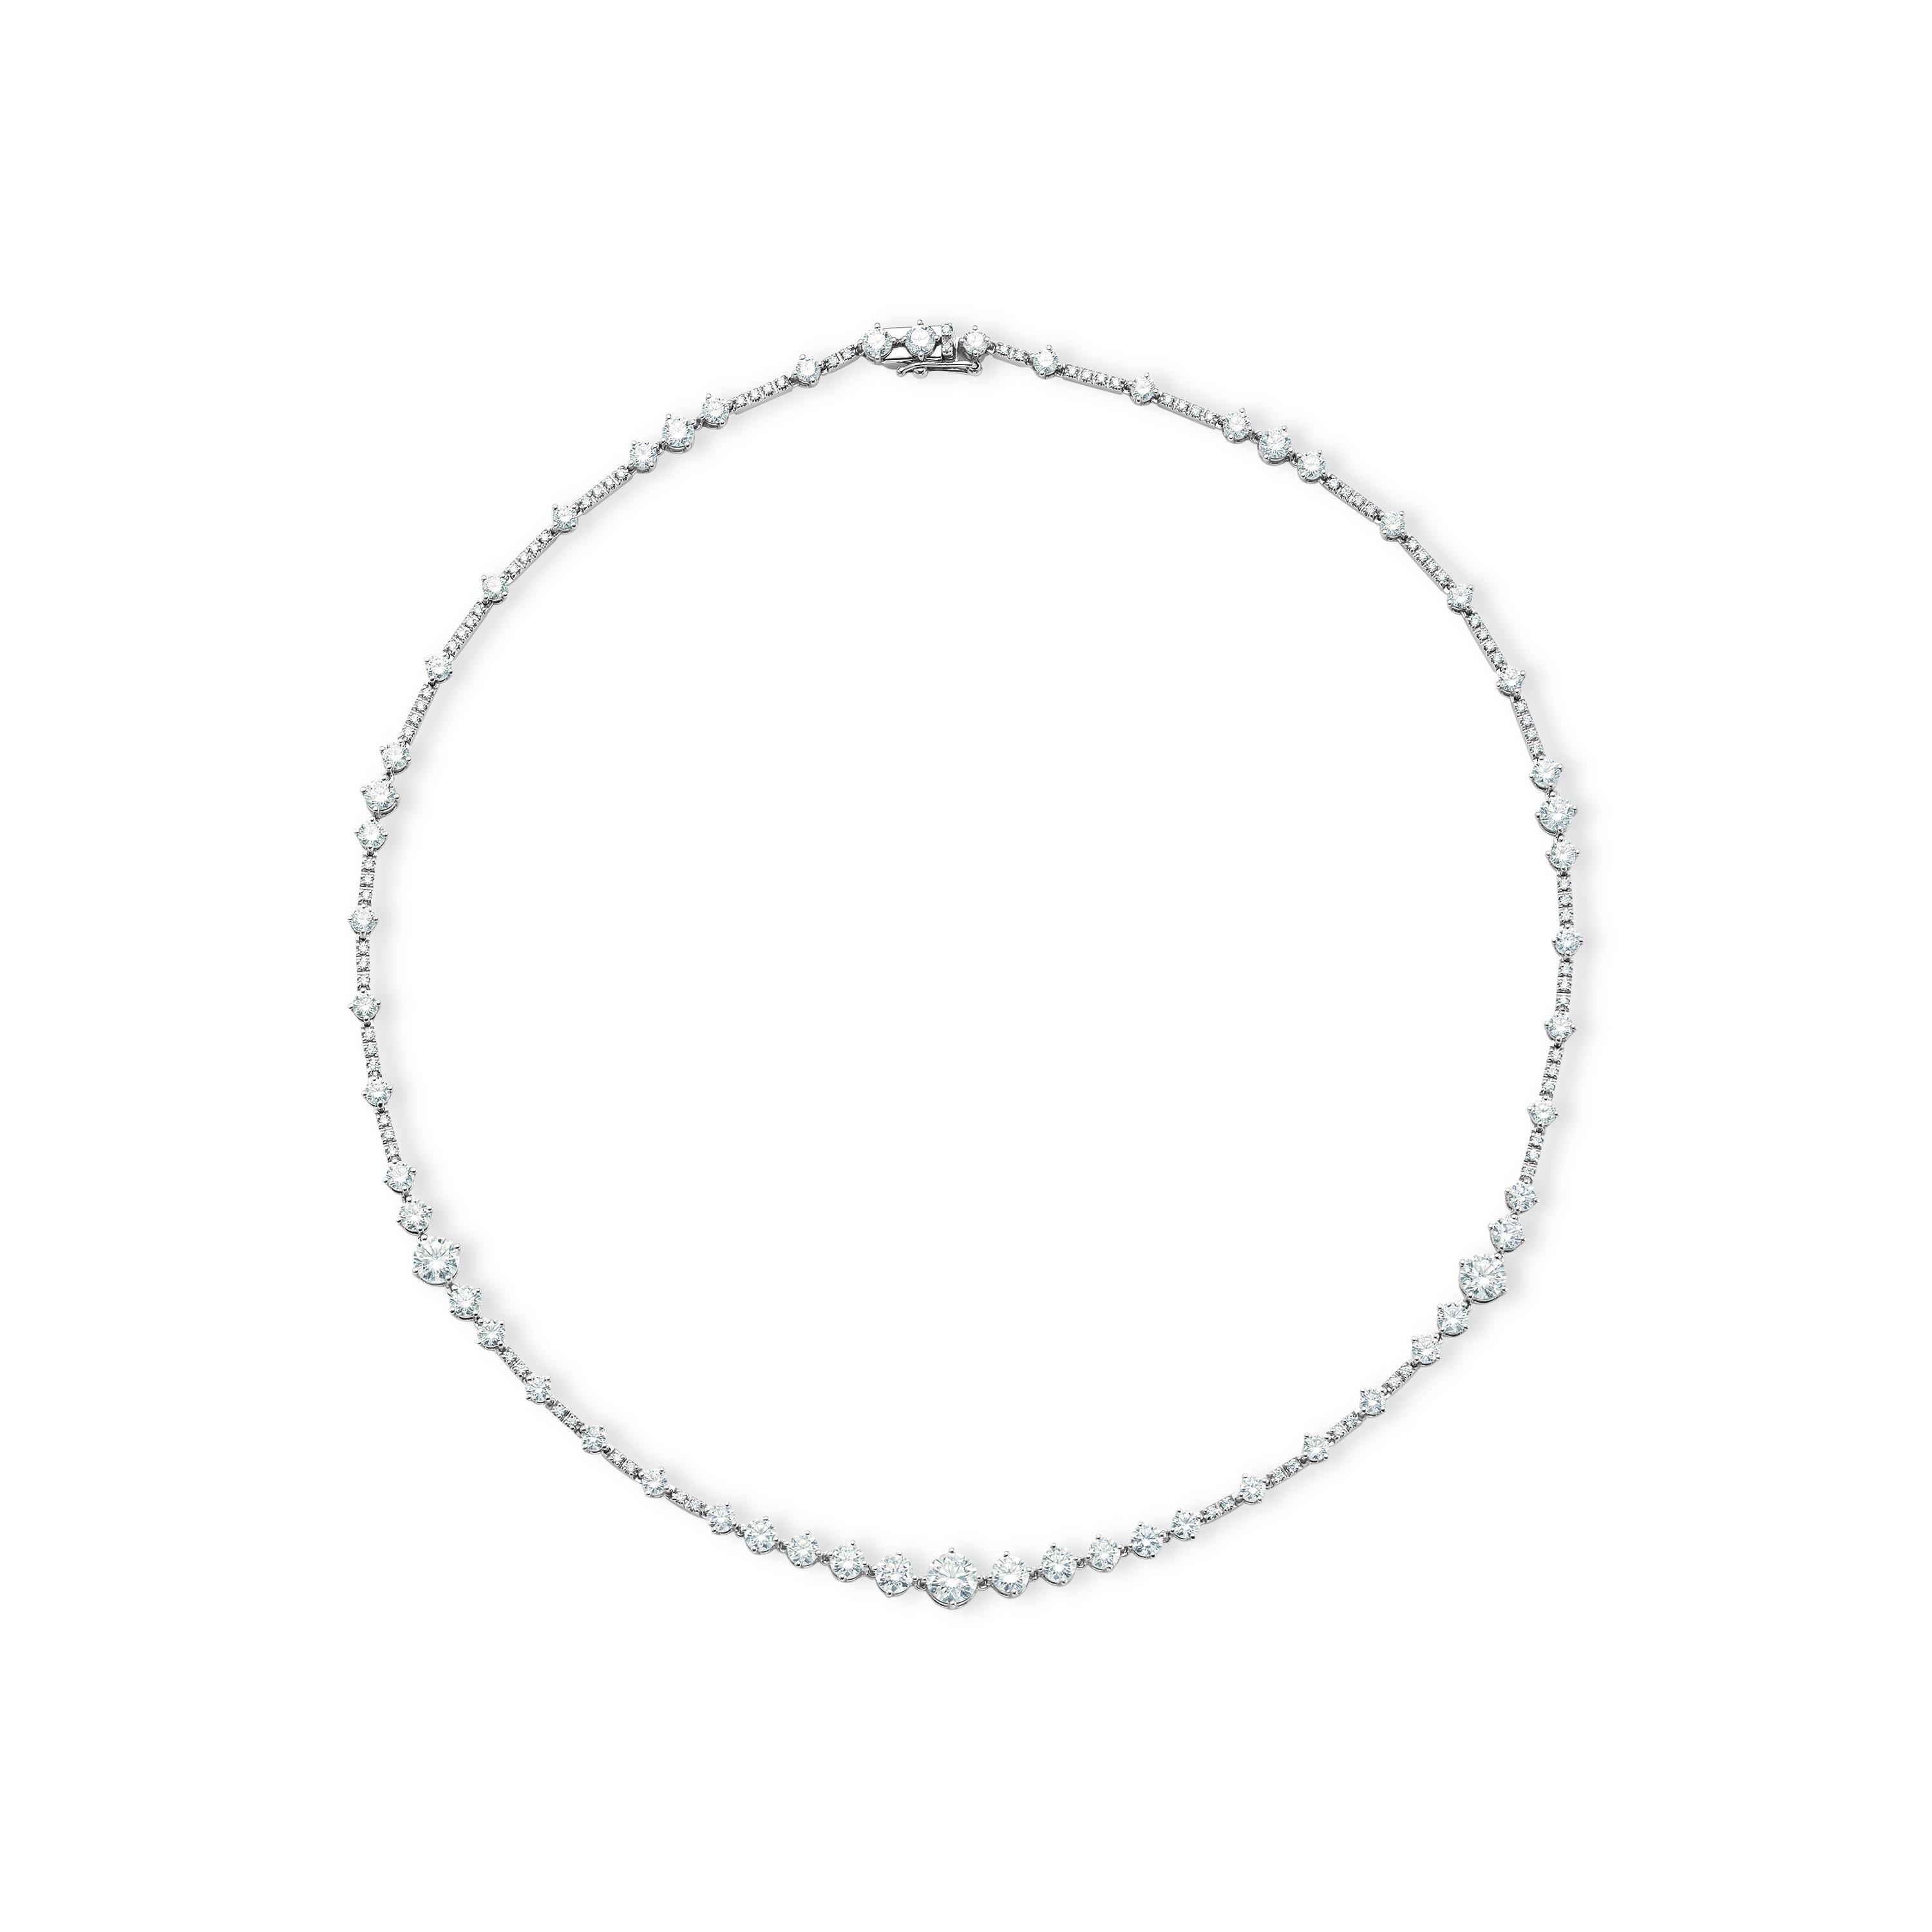 Thames Path necklace London by De Beers  Real diamond necklace, Diamond  jewelry designs, Jewelry